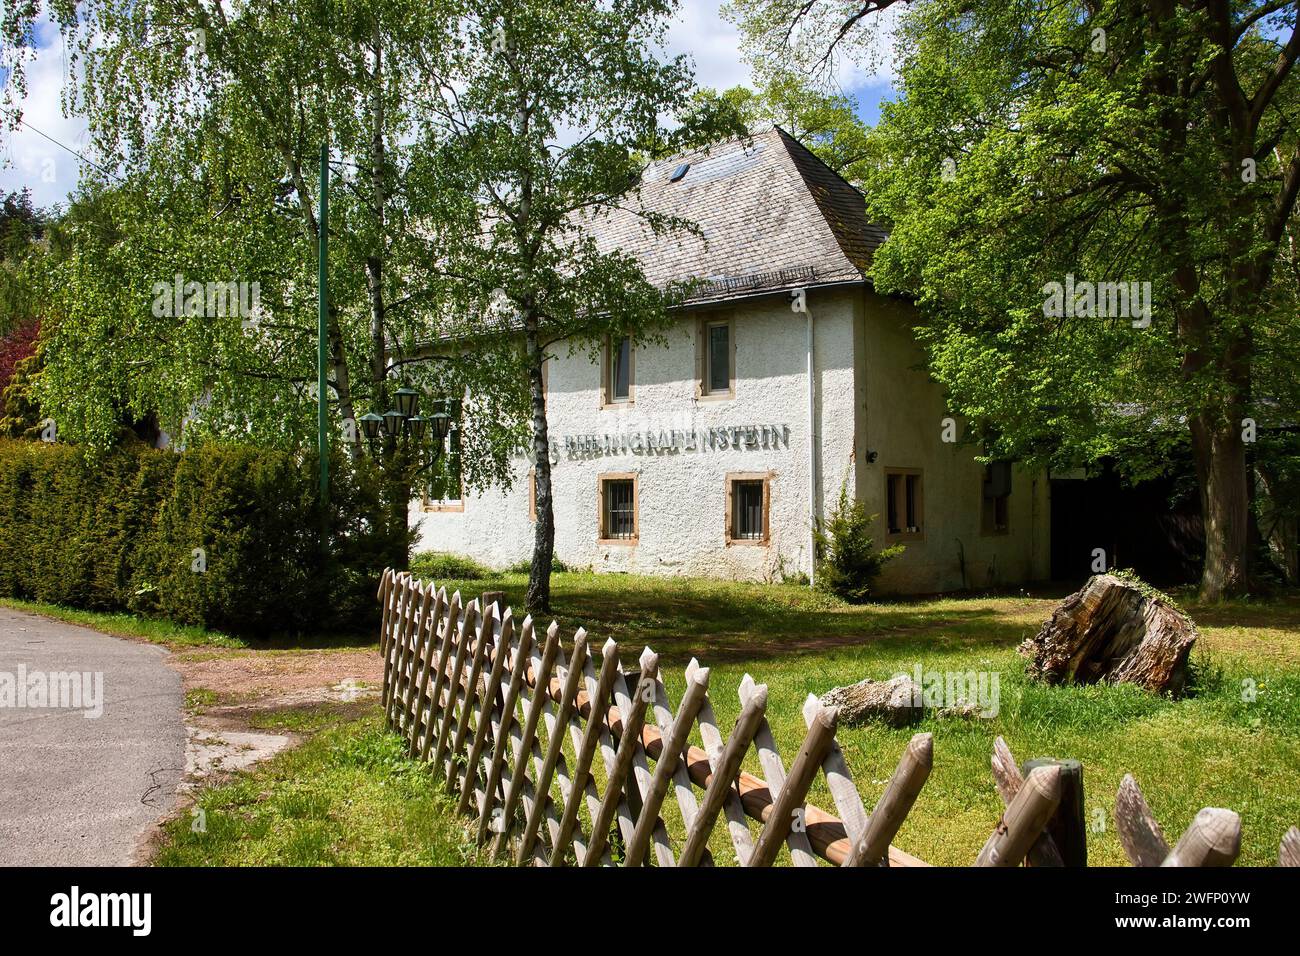 Bad Munster, Germany - May 12, 2021: White building with Rheingrafenstein on the side on a spring day with green grass and trees. Stock Photo